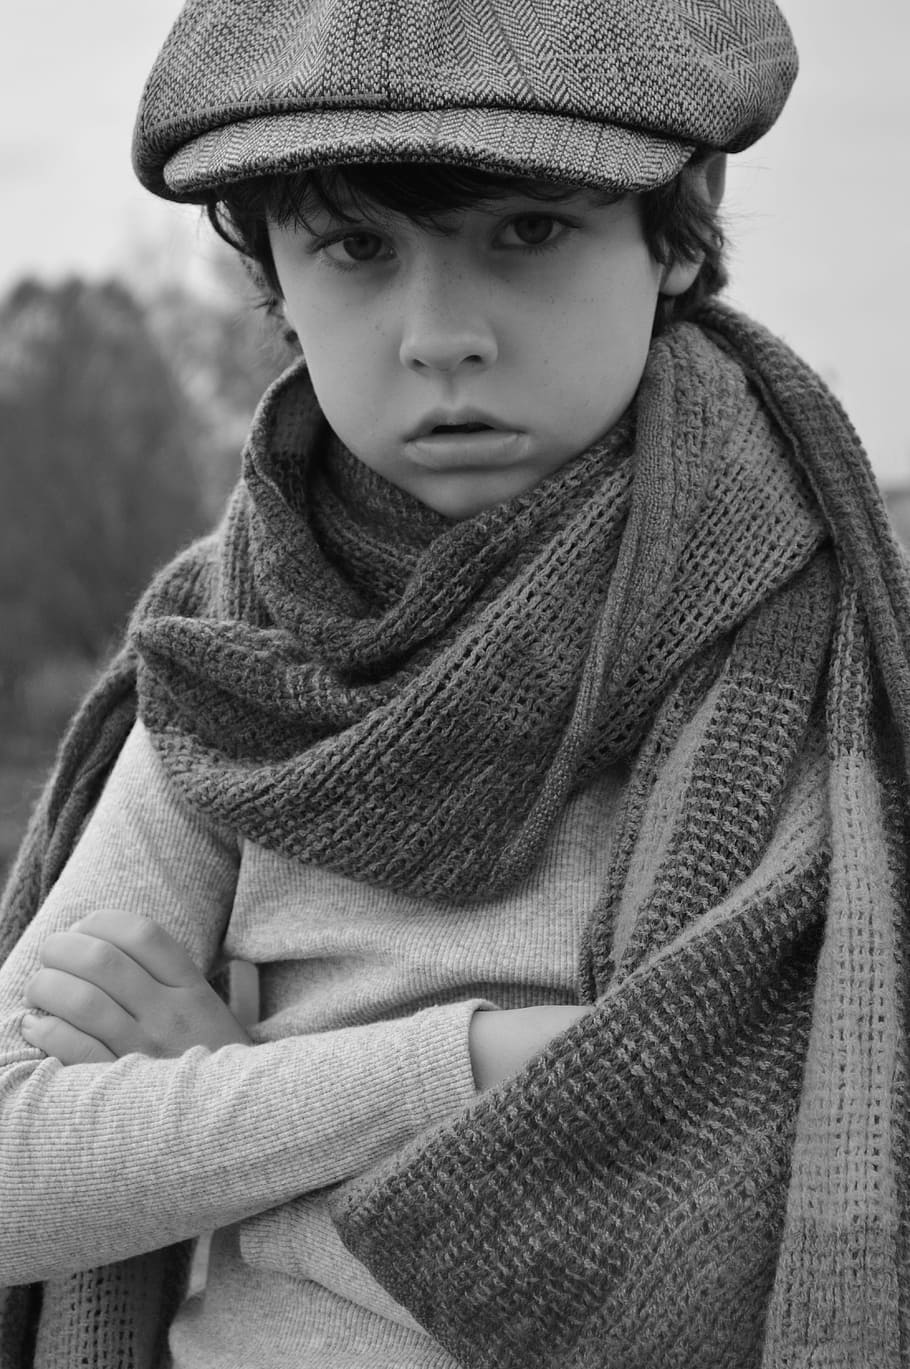 grayscale photo of boy wearing scarf and cap, portrait, baby